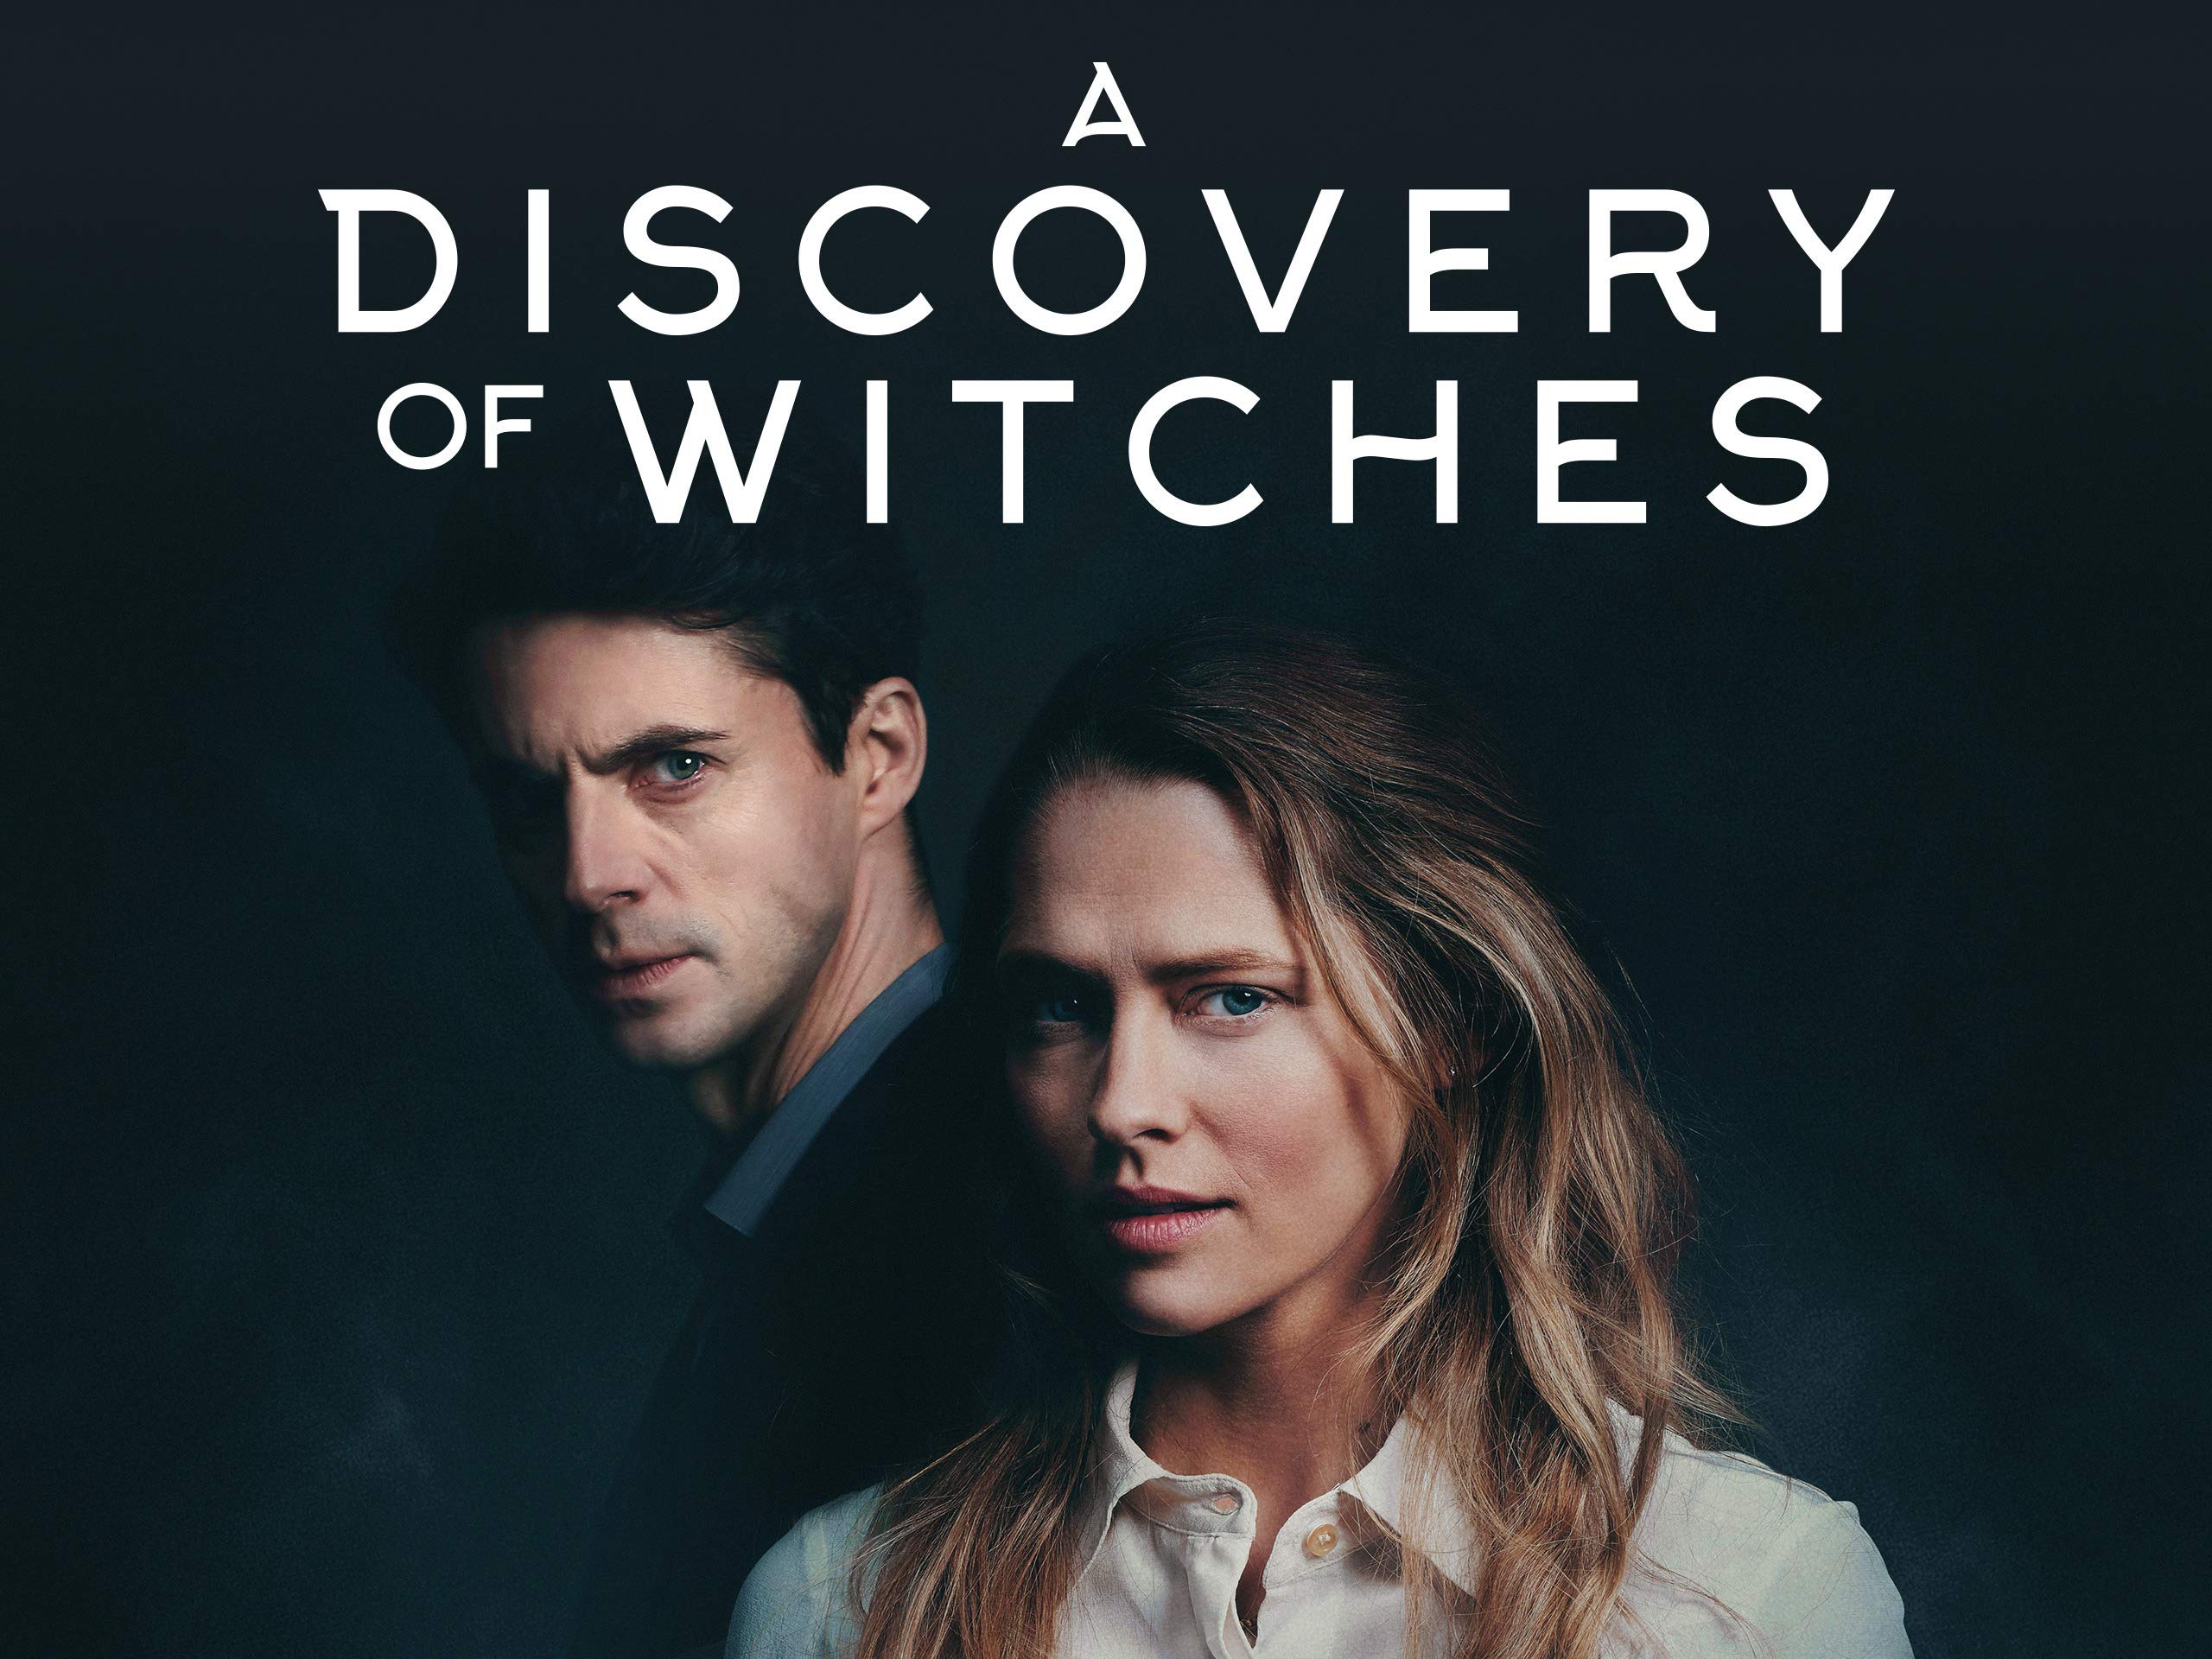 a discovery of witches season 2 us release date